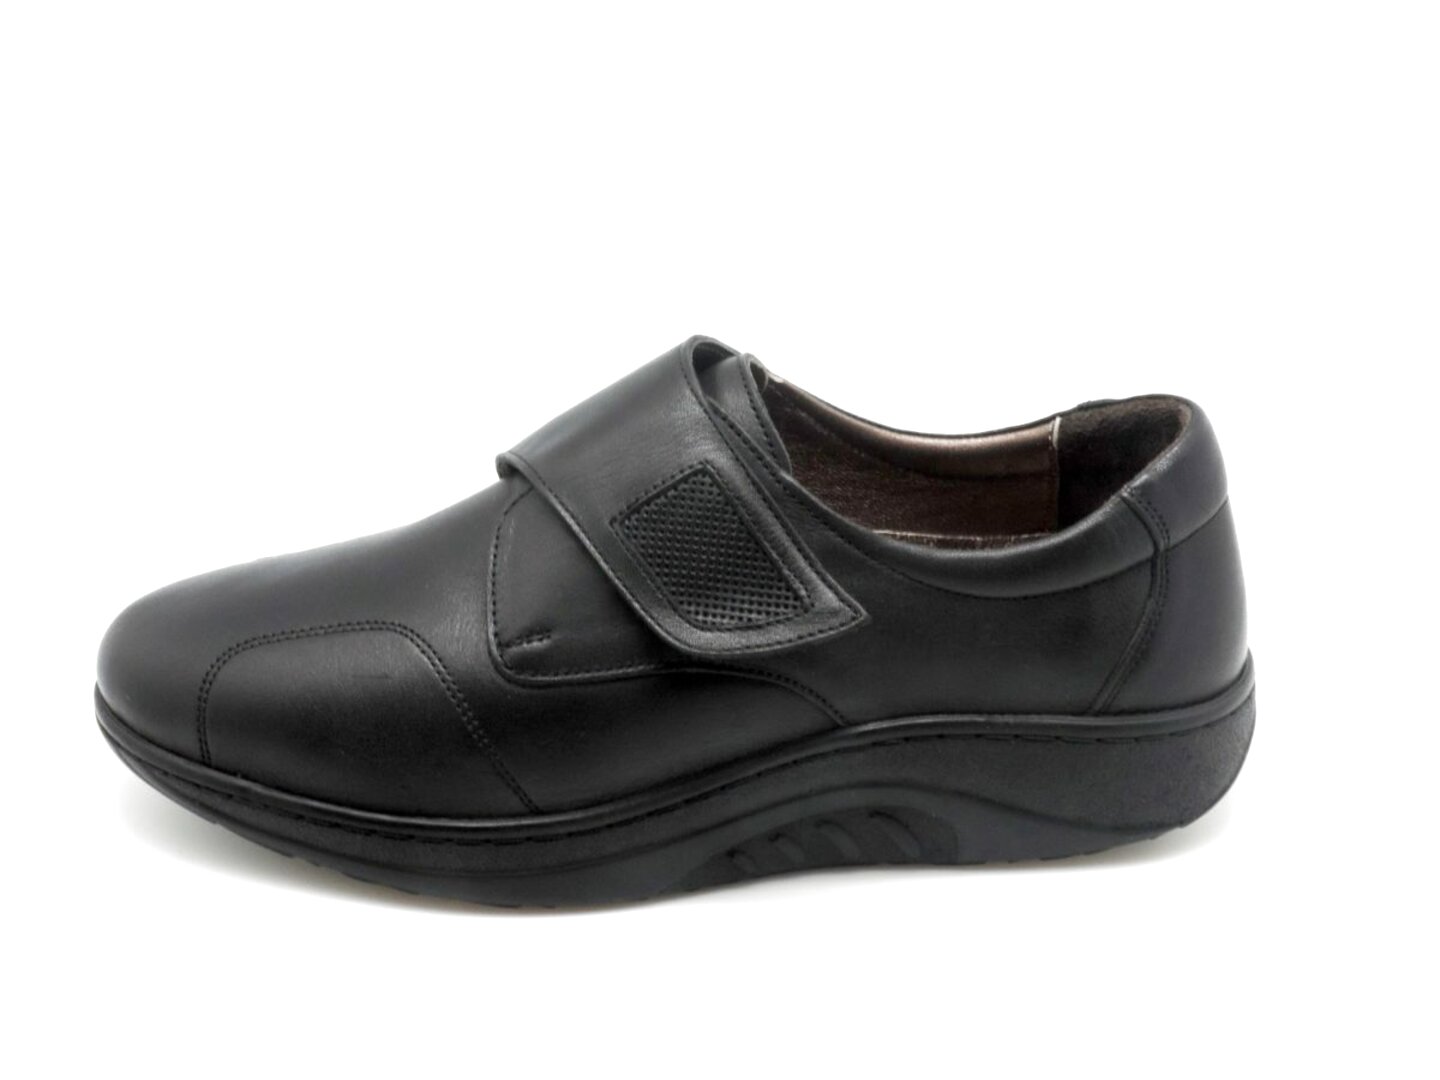 Orthopedic Shoes for sale in UK | 42 used Orthopedic Shoes